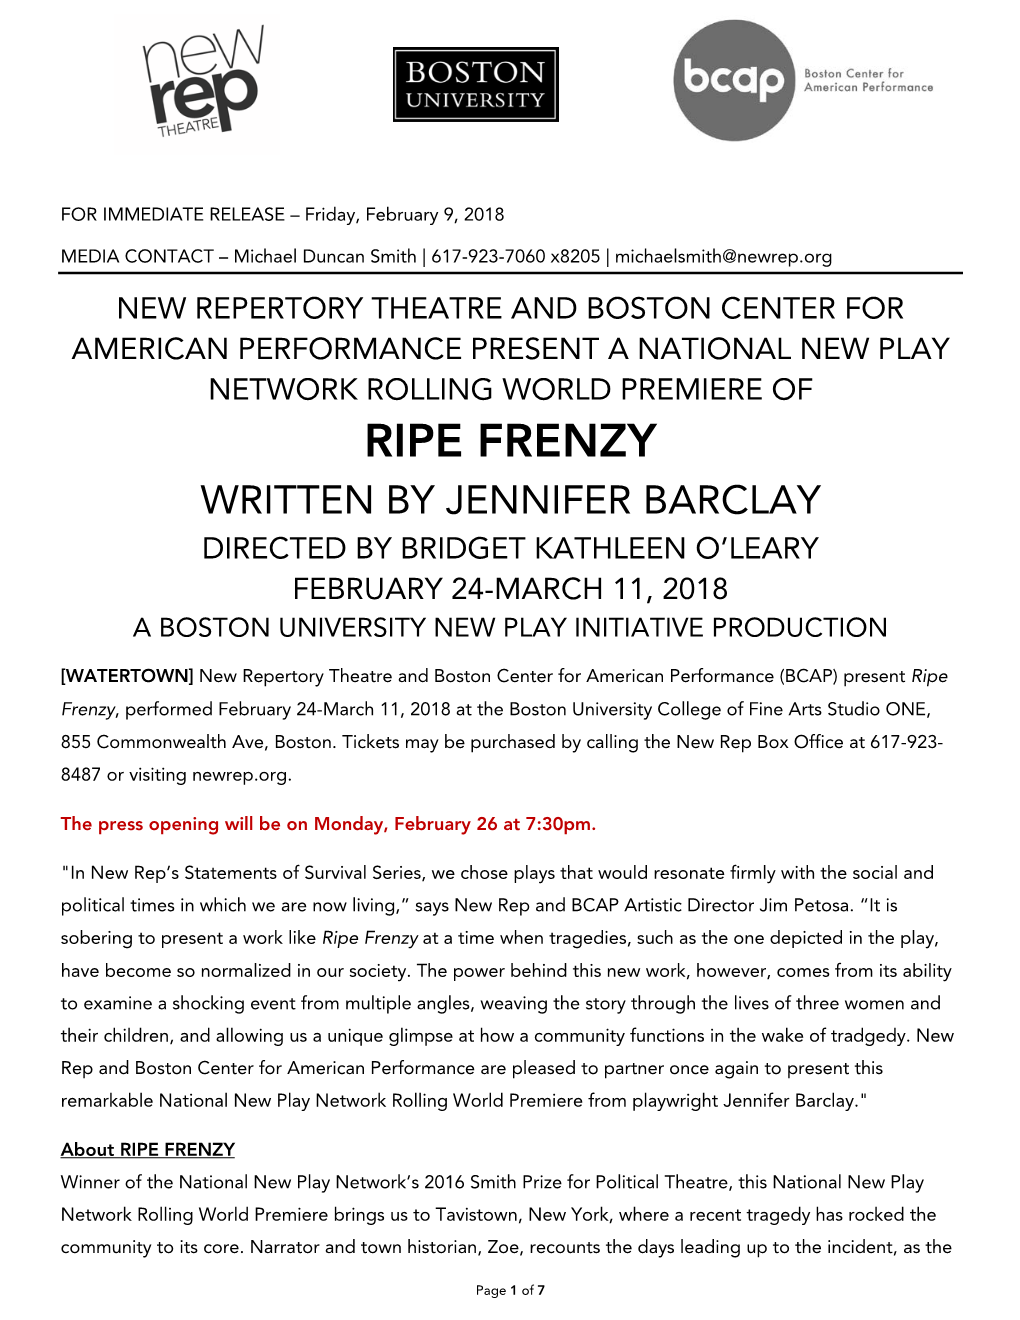 Ripe Frenzy Written by Jennifer Barclay Directed by Bridget Kathleen O’Leary February 24-March 11, 2018 a Boston University New Play Initiative Production